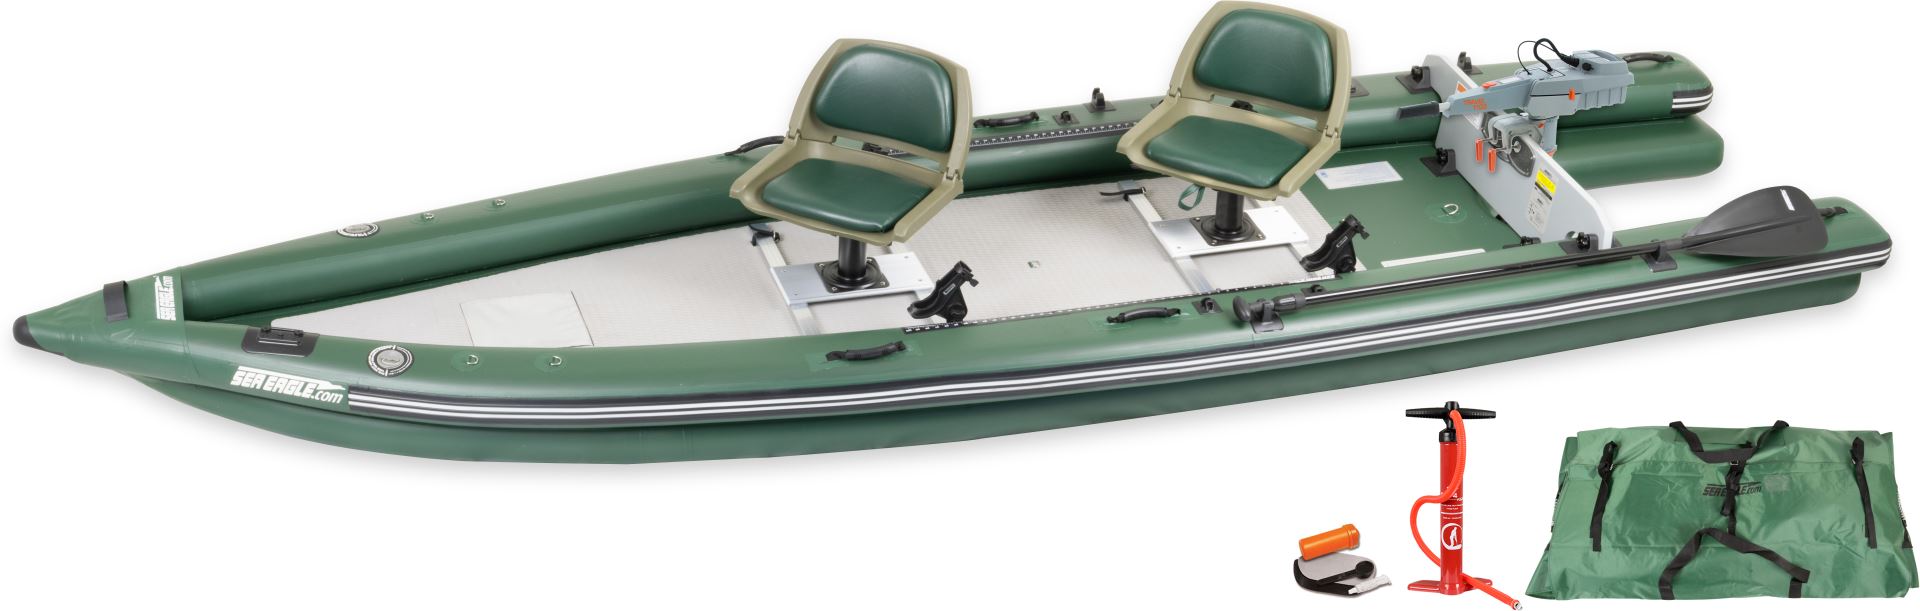 Sea Eagle FSK16 3 person Inflatable Fishing Boat. Package Prices ...